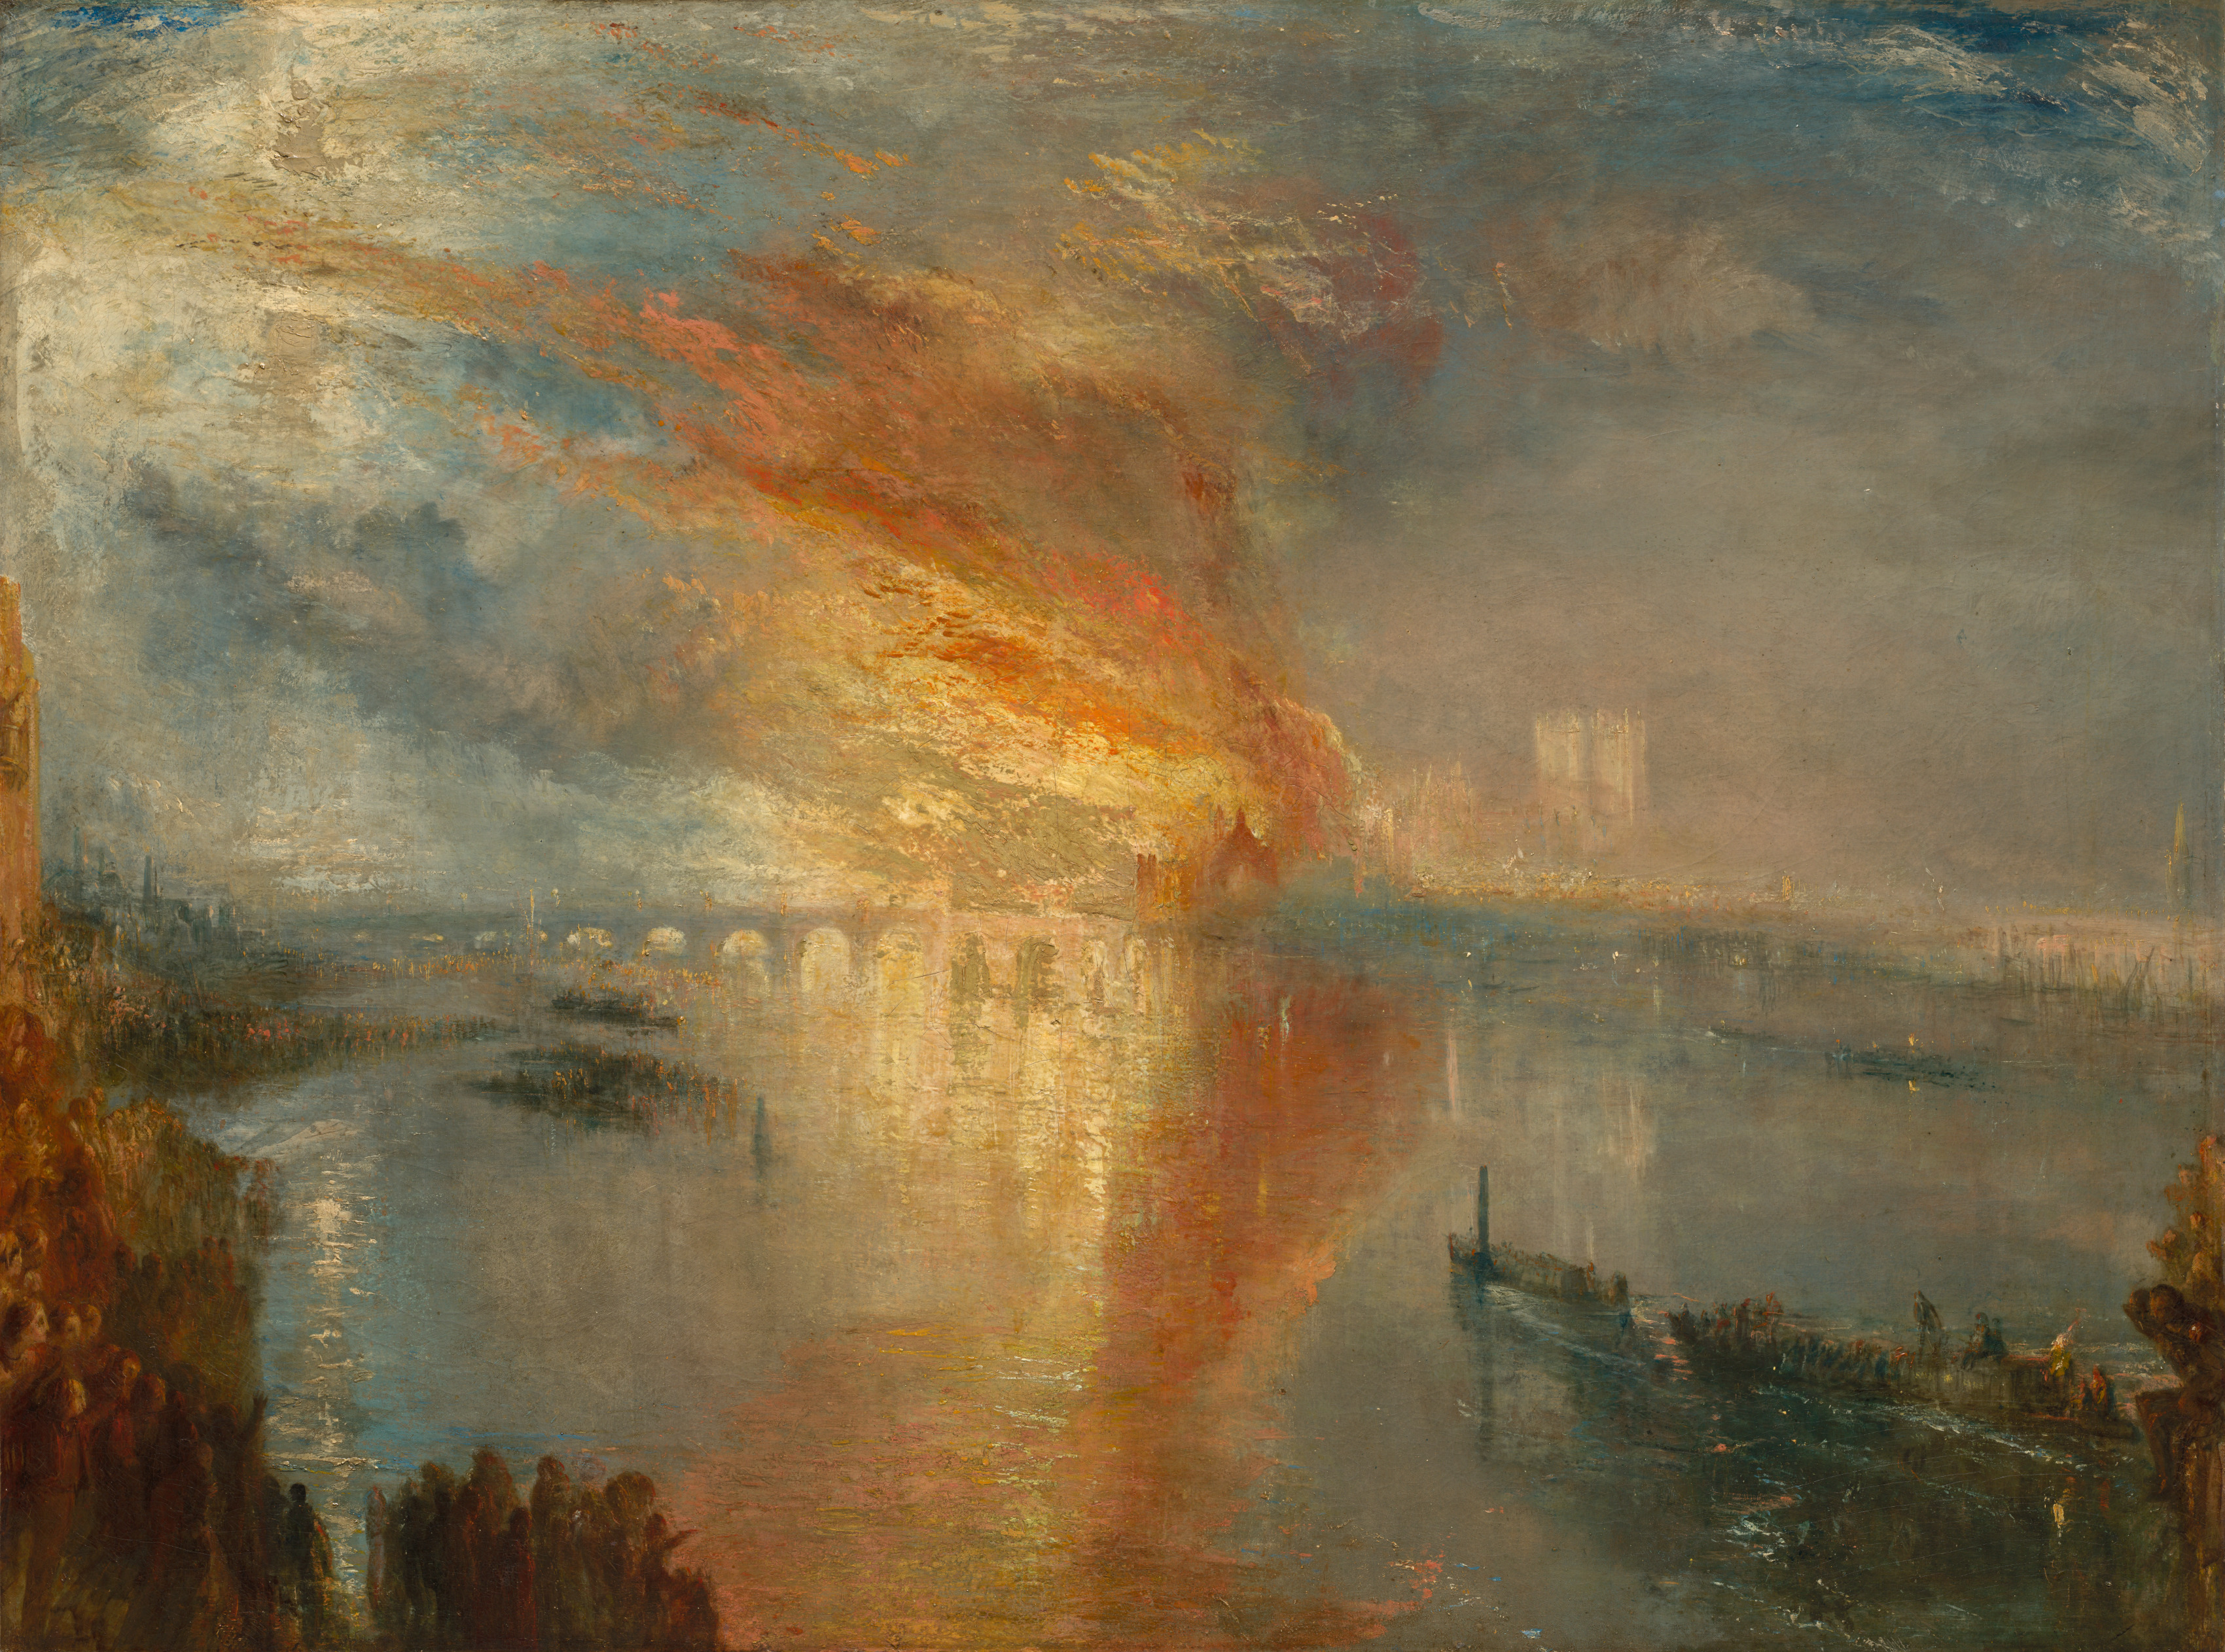 The Burning of the Houses of Lords and Commons, 16 October 1834 by Joseph Mallord William Turner - 1835 - 123.5 x 153.5 cm Cleveland Museum of Art